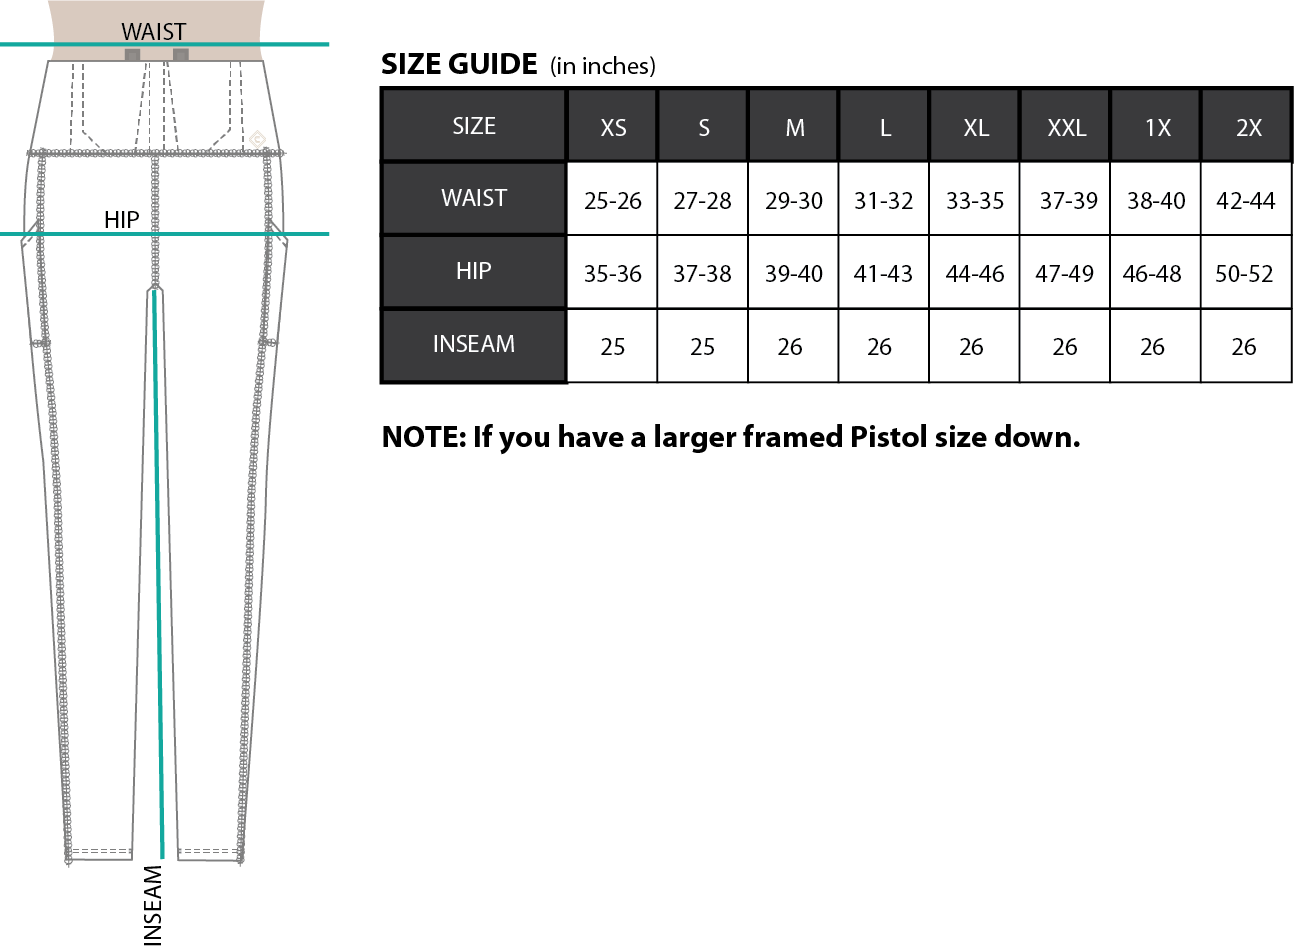 https://gwgclothing.com/wp-content/uploads/2021/11/size-chart-twaw-eclipse-leggings.png